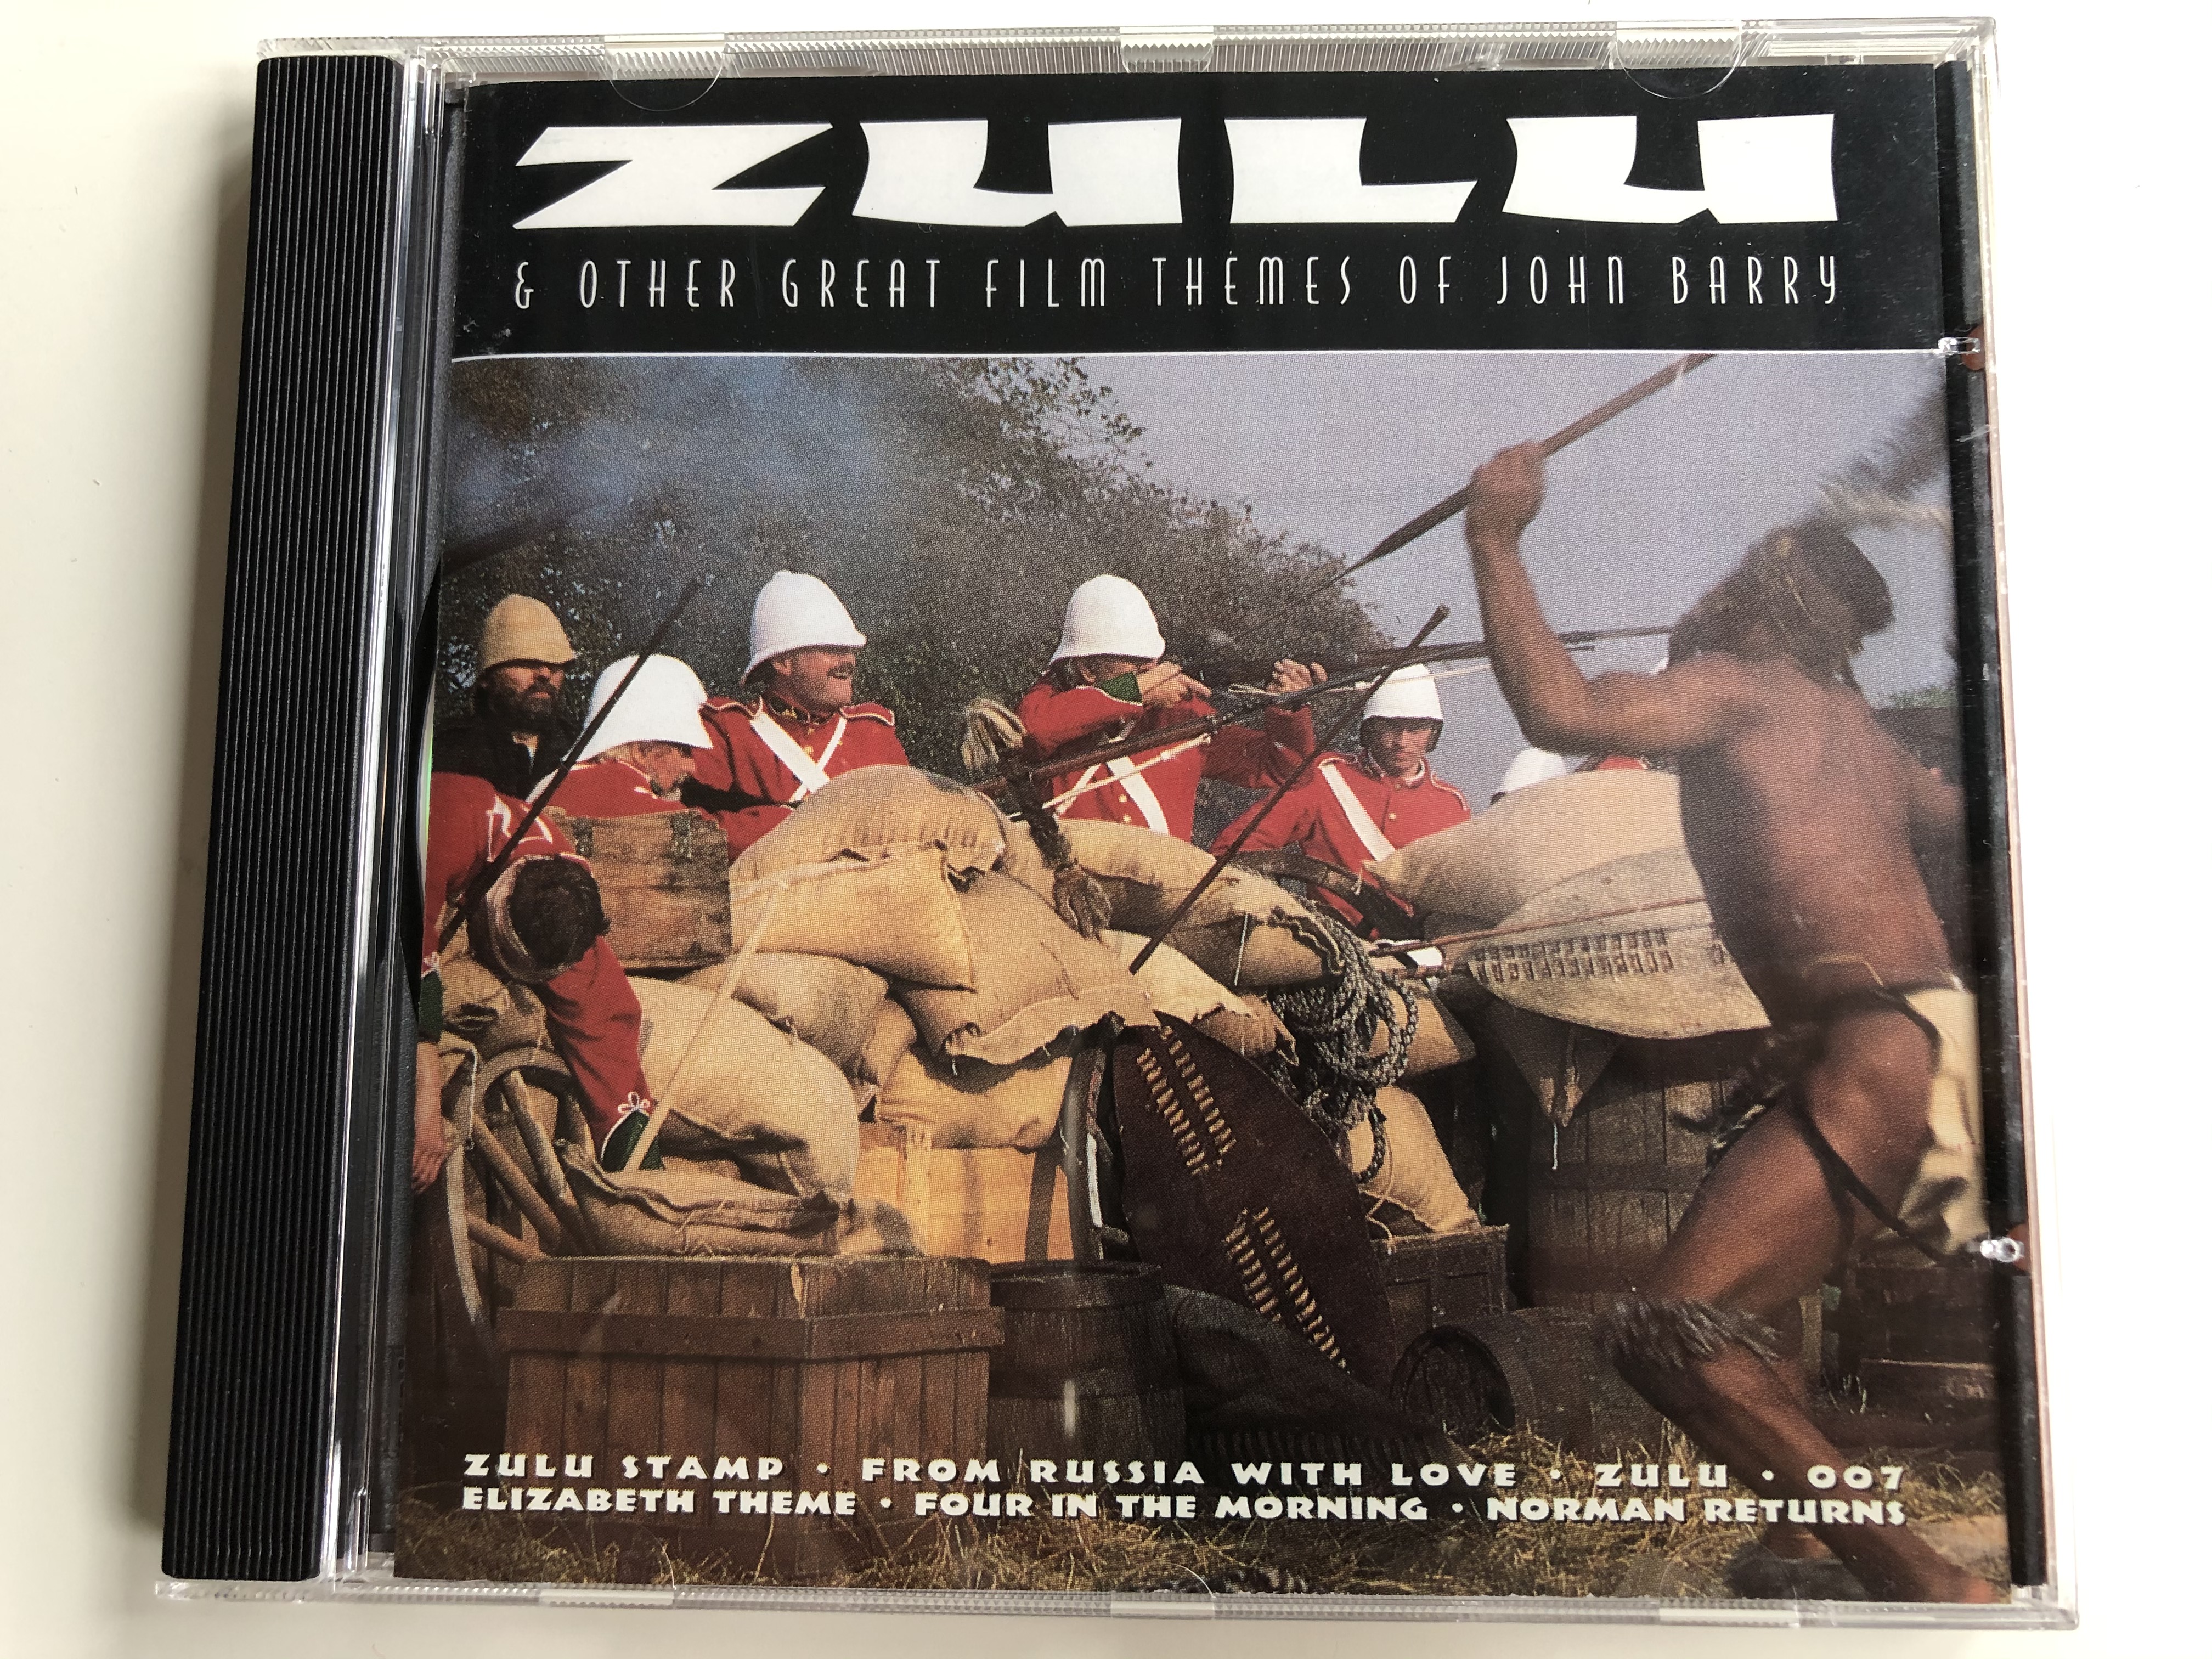 zulu-other-great-film-themes-of-john-barry-zulu-stamp-from-russia-with-love-zulu-007-elizabeth-theme-four-in-the-morning-norman-returns-castle-communications-audio-cd-1995-mac-cd-2-1-.jpg